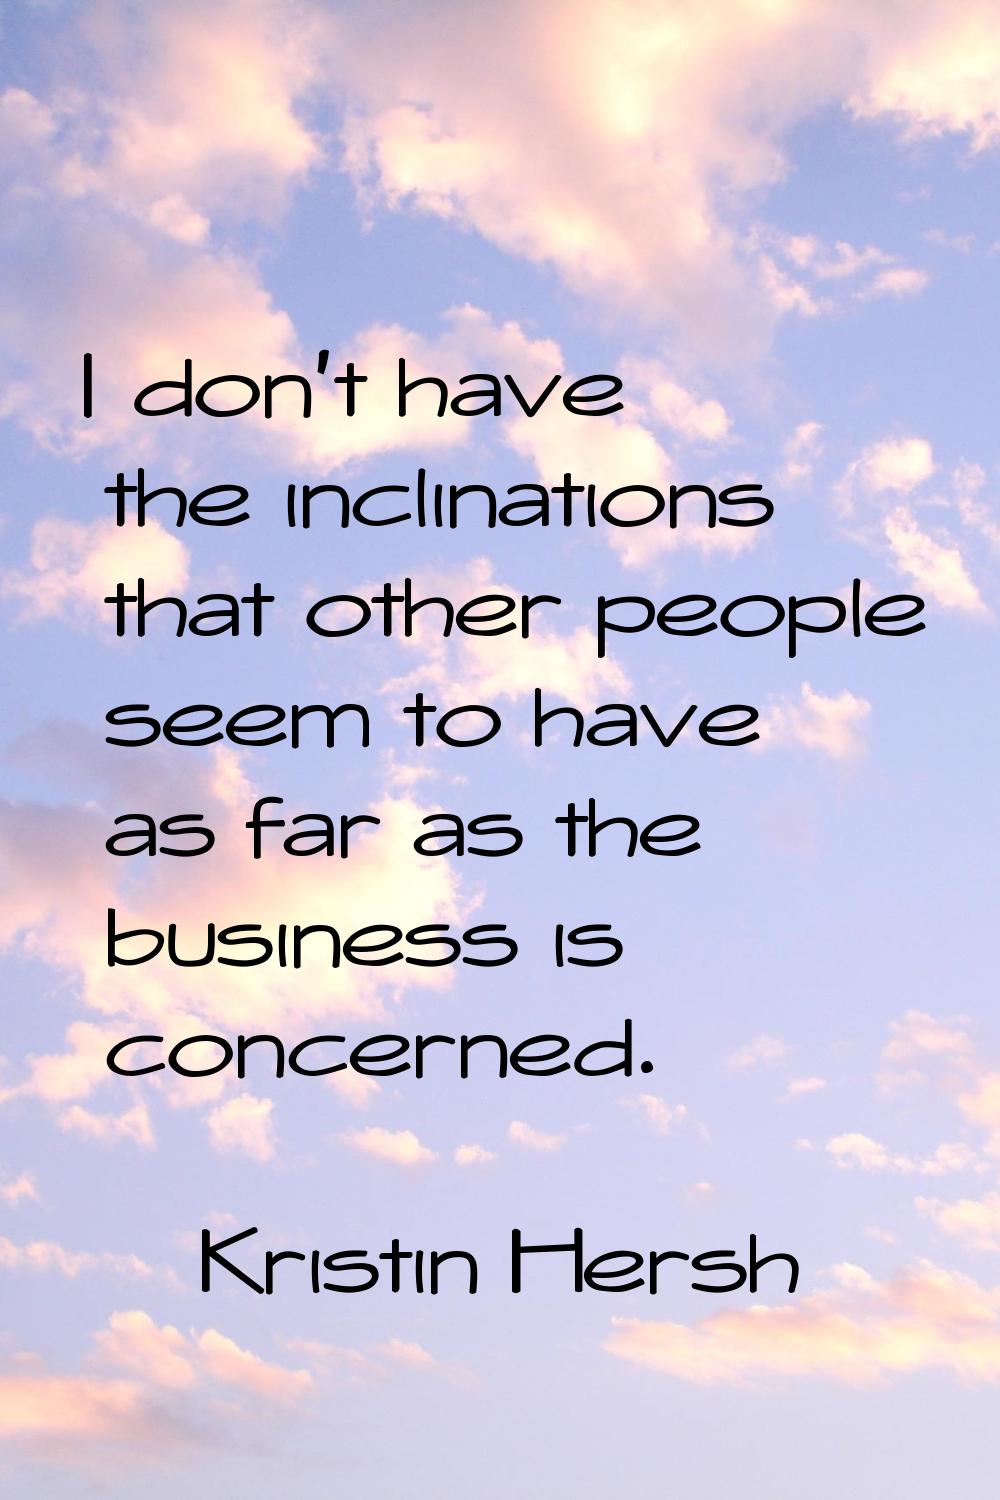 I don't have the inclinations that other people seem to have as far as the business is concerned.